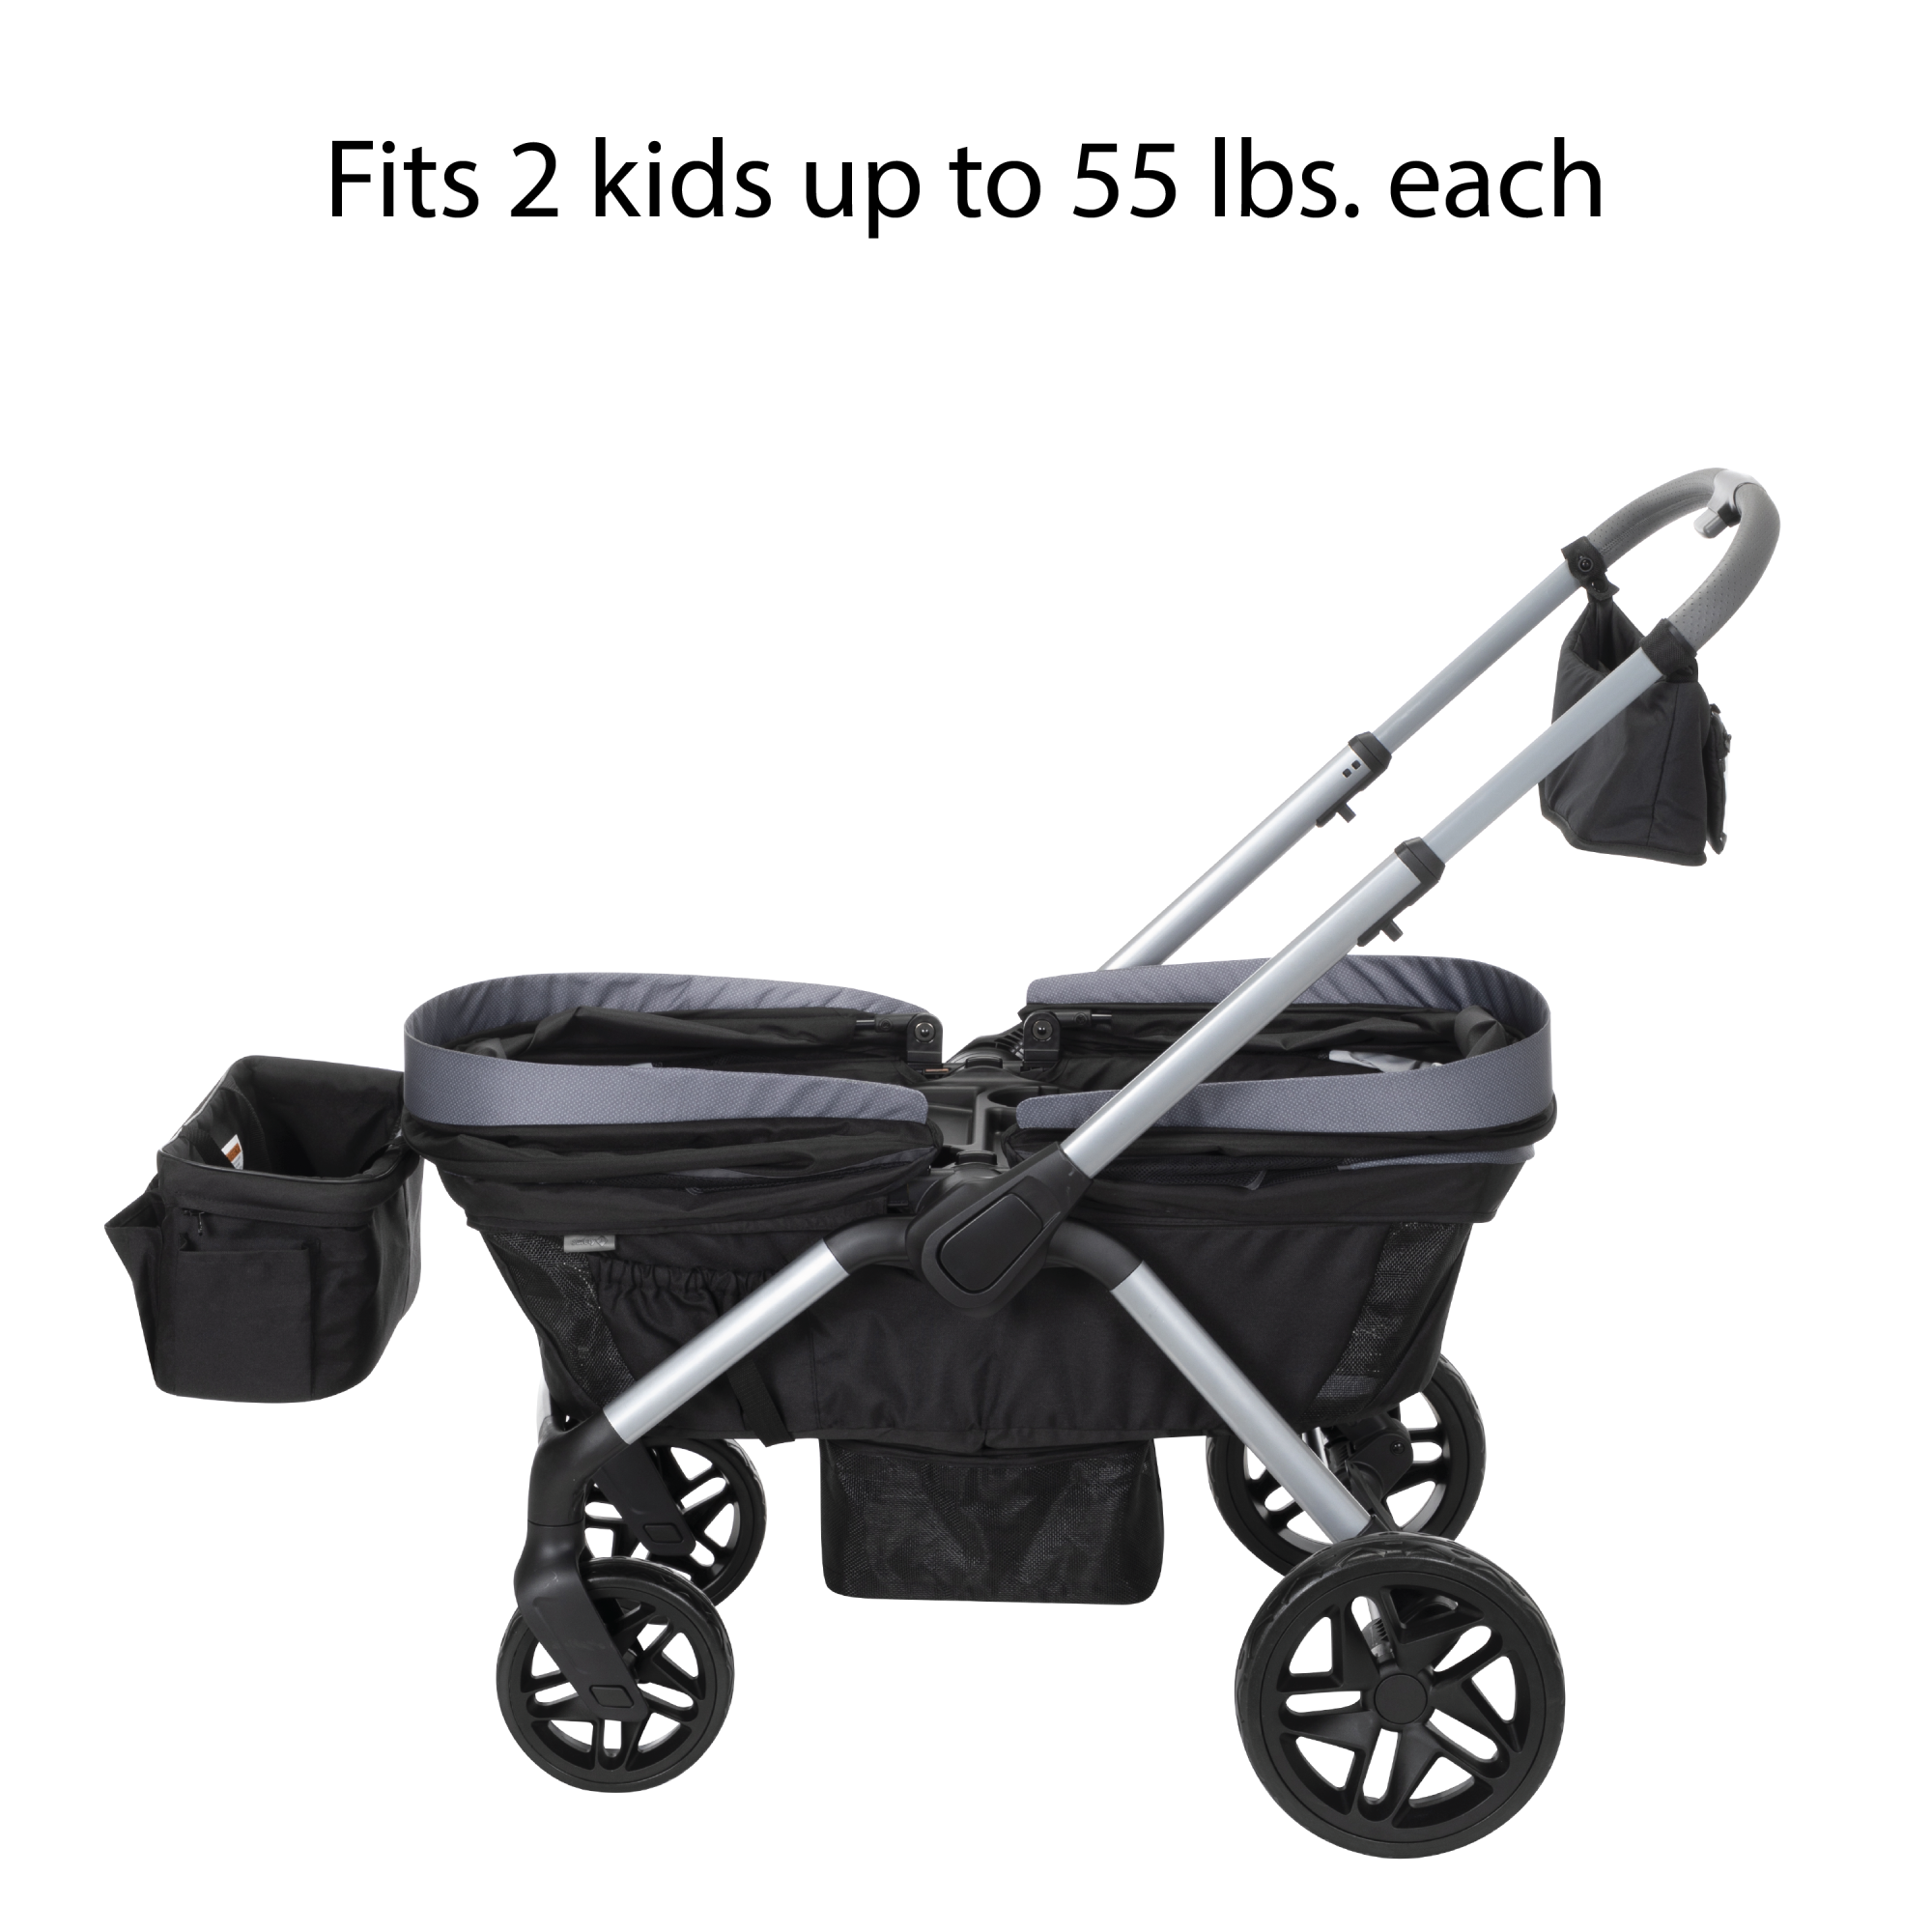 Summit Wagon Stroller - fits 2 kids up to 55 lbs. each